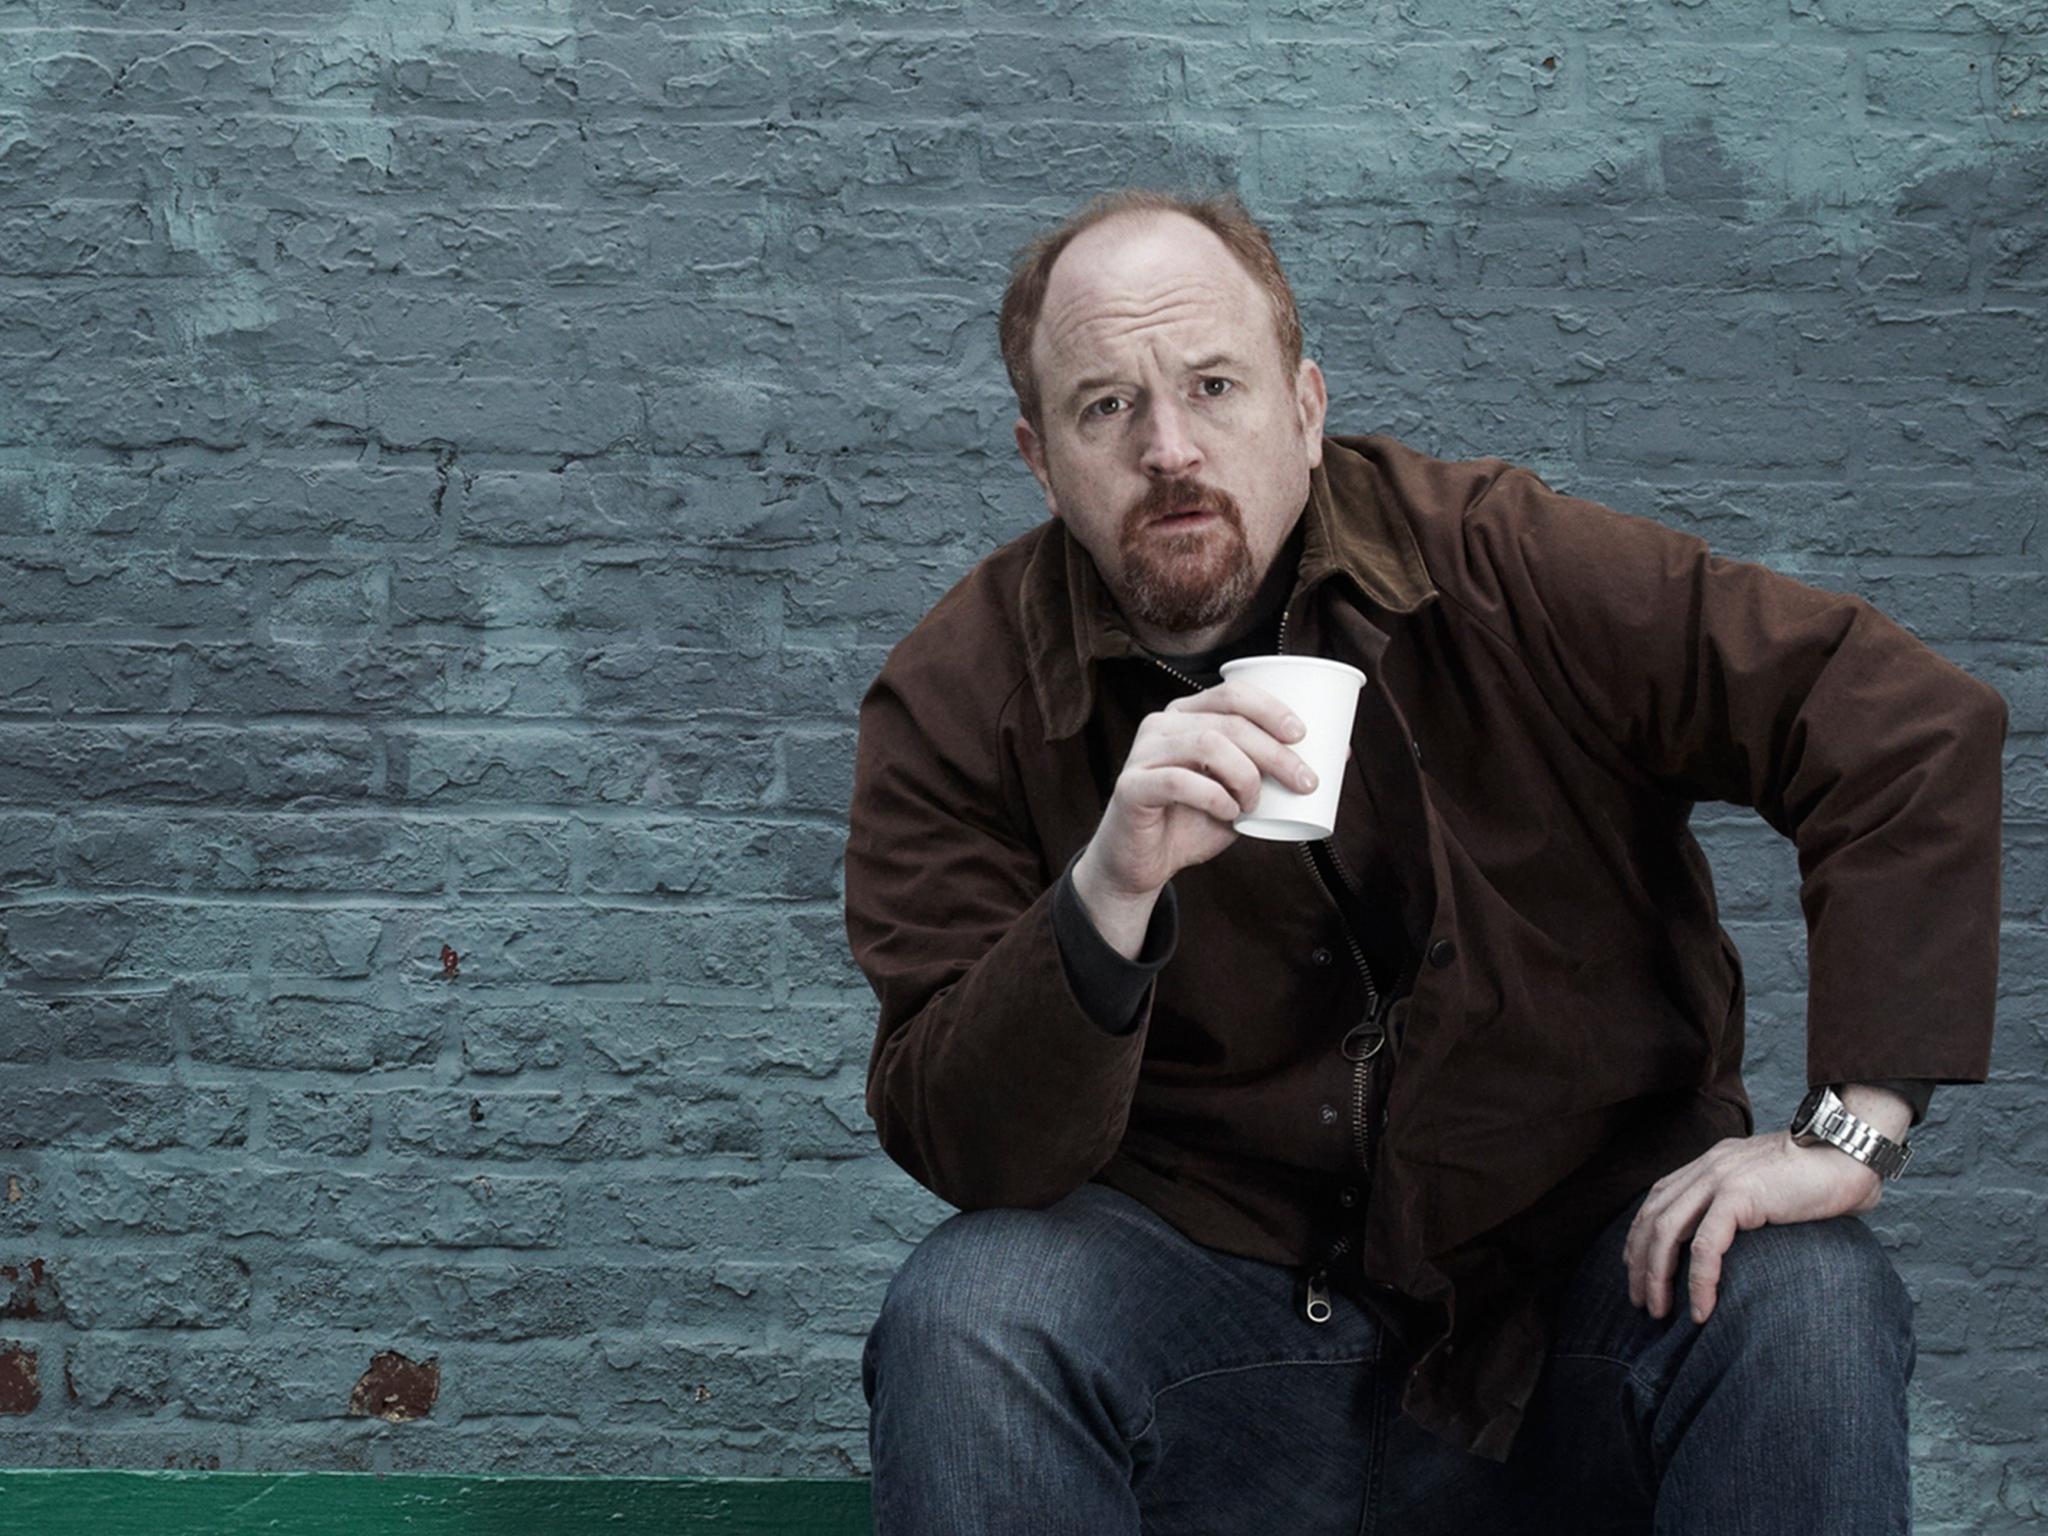 Watch: A Preview of Louis C.K.'s Commentary From the 'Louie